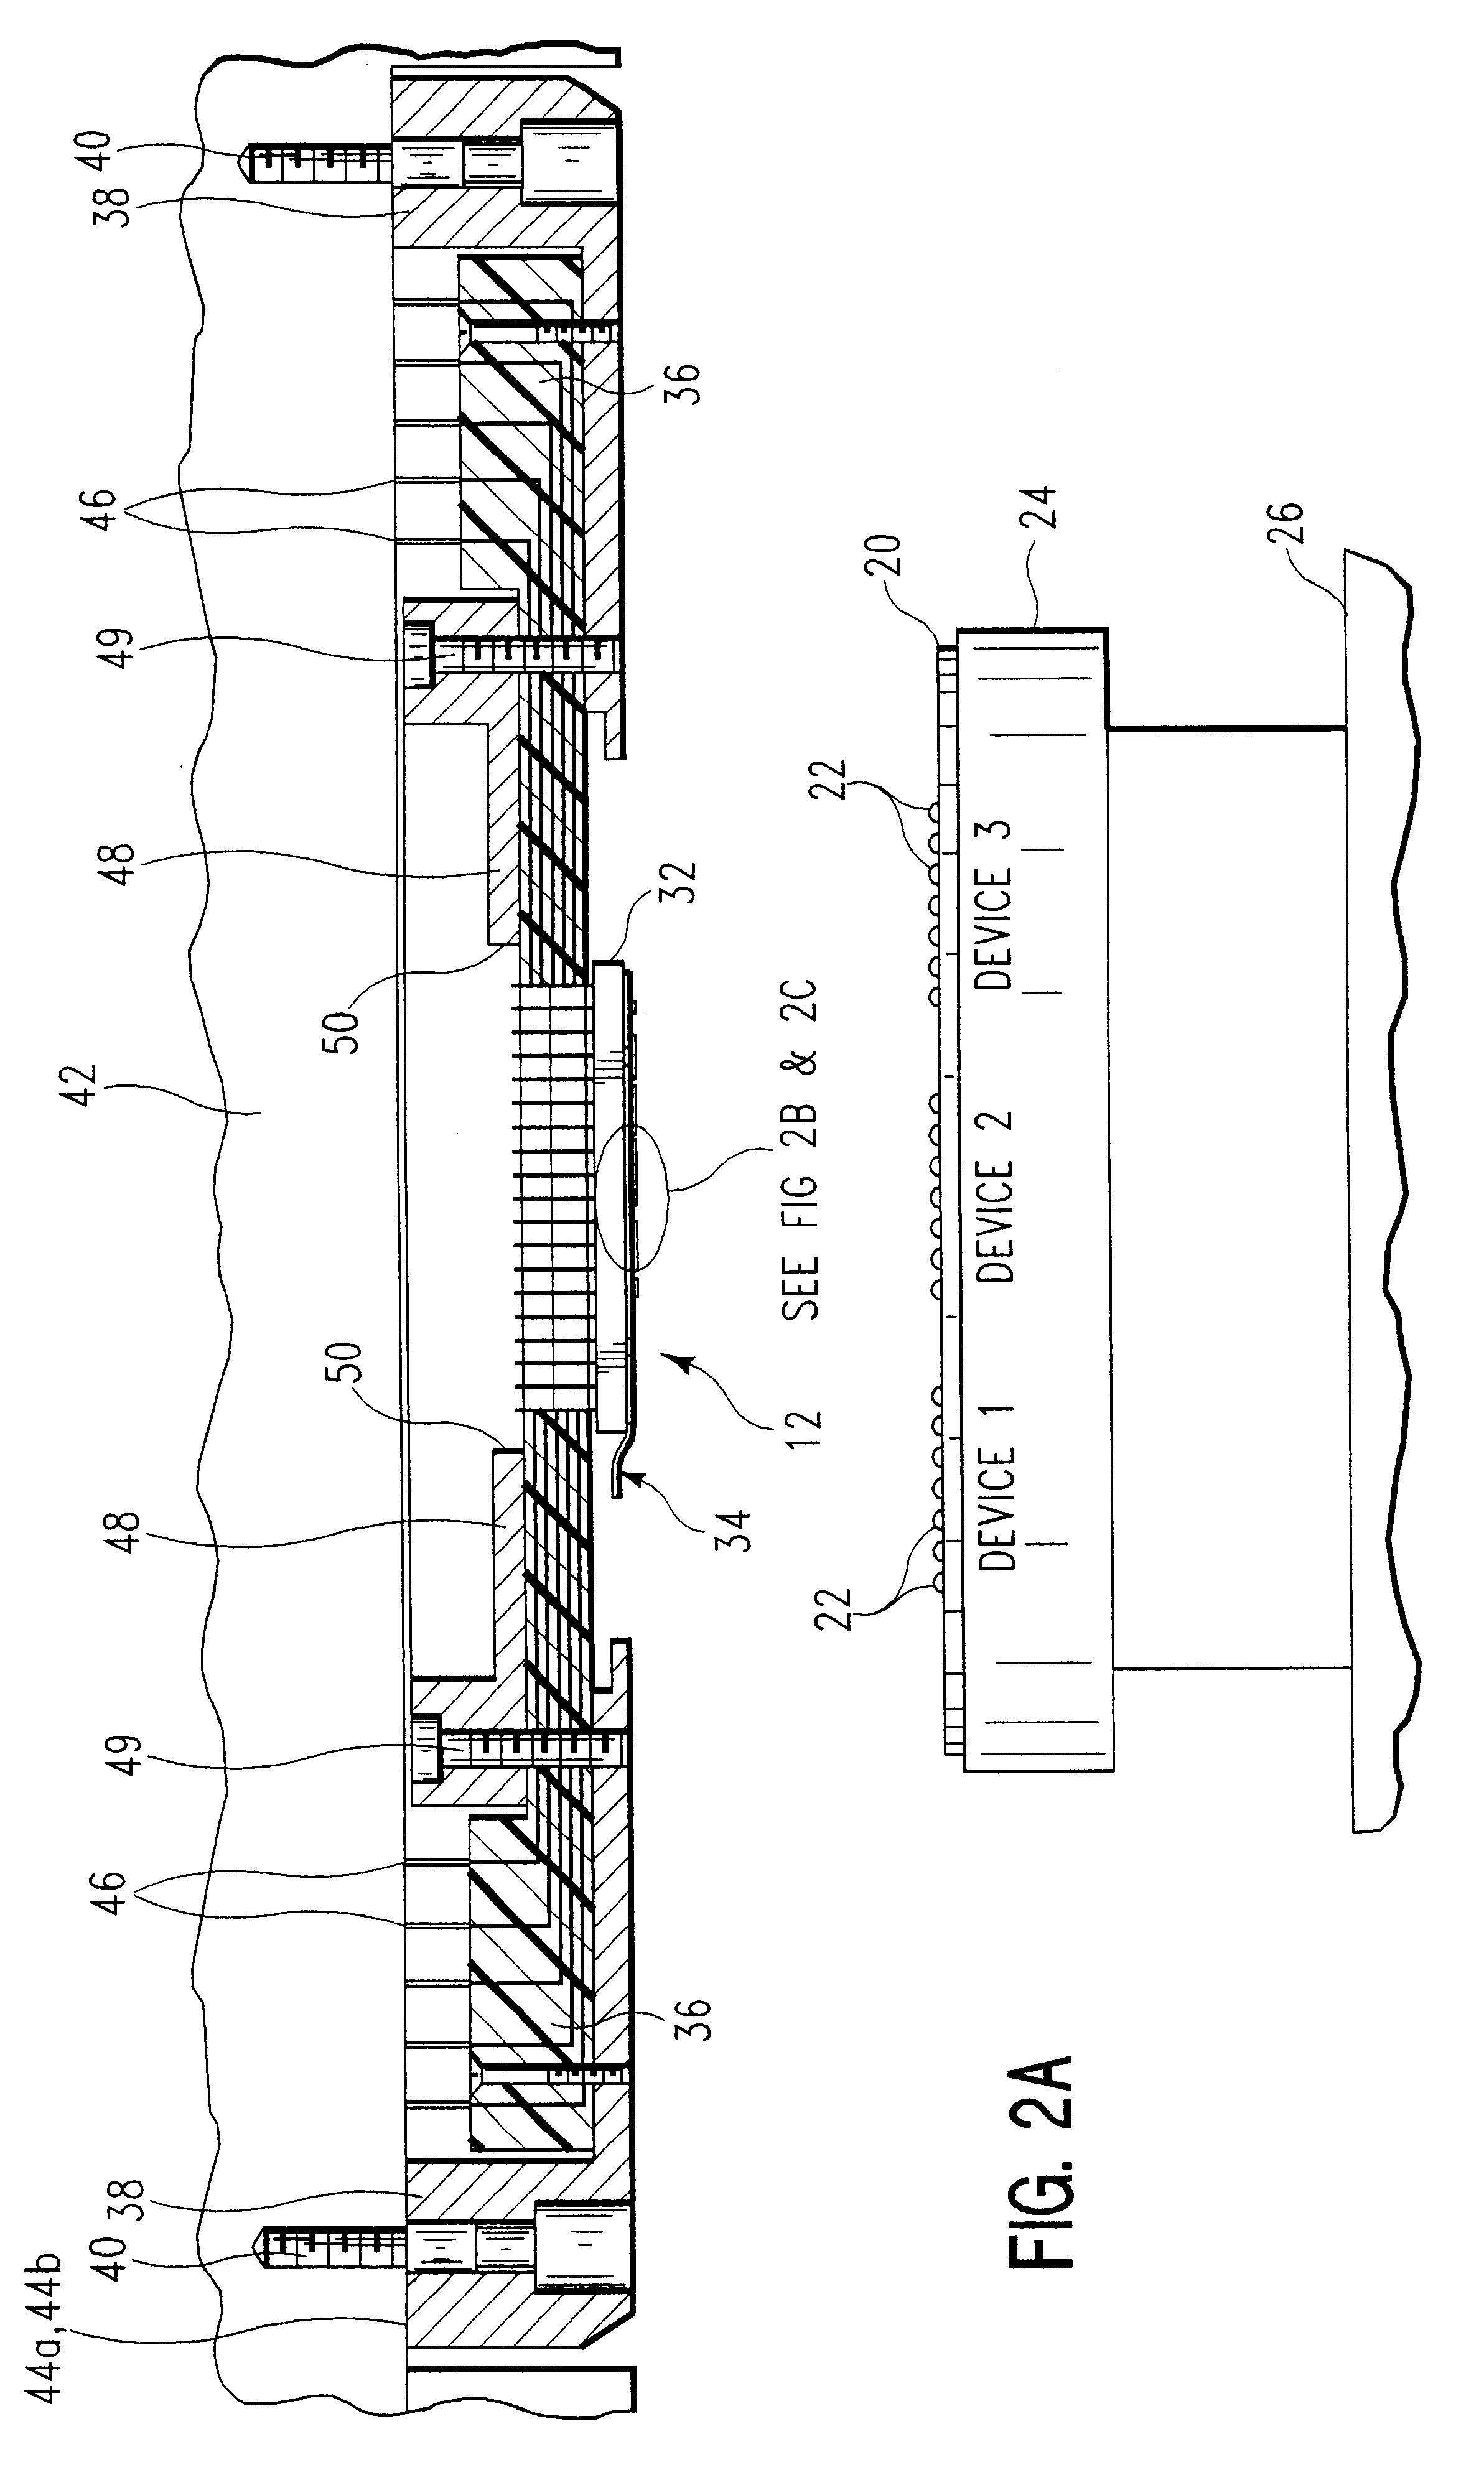 Wafer probe interface arrangement with nonresilient probe elements and support structure